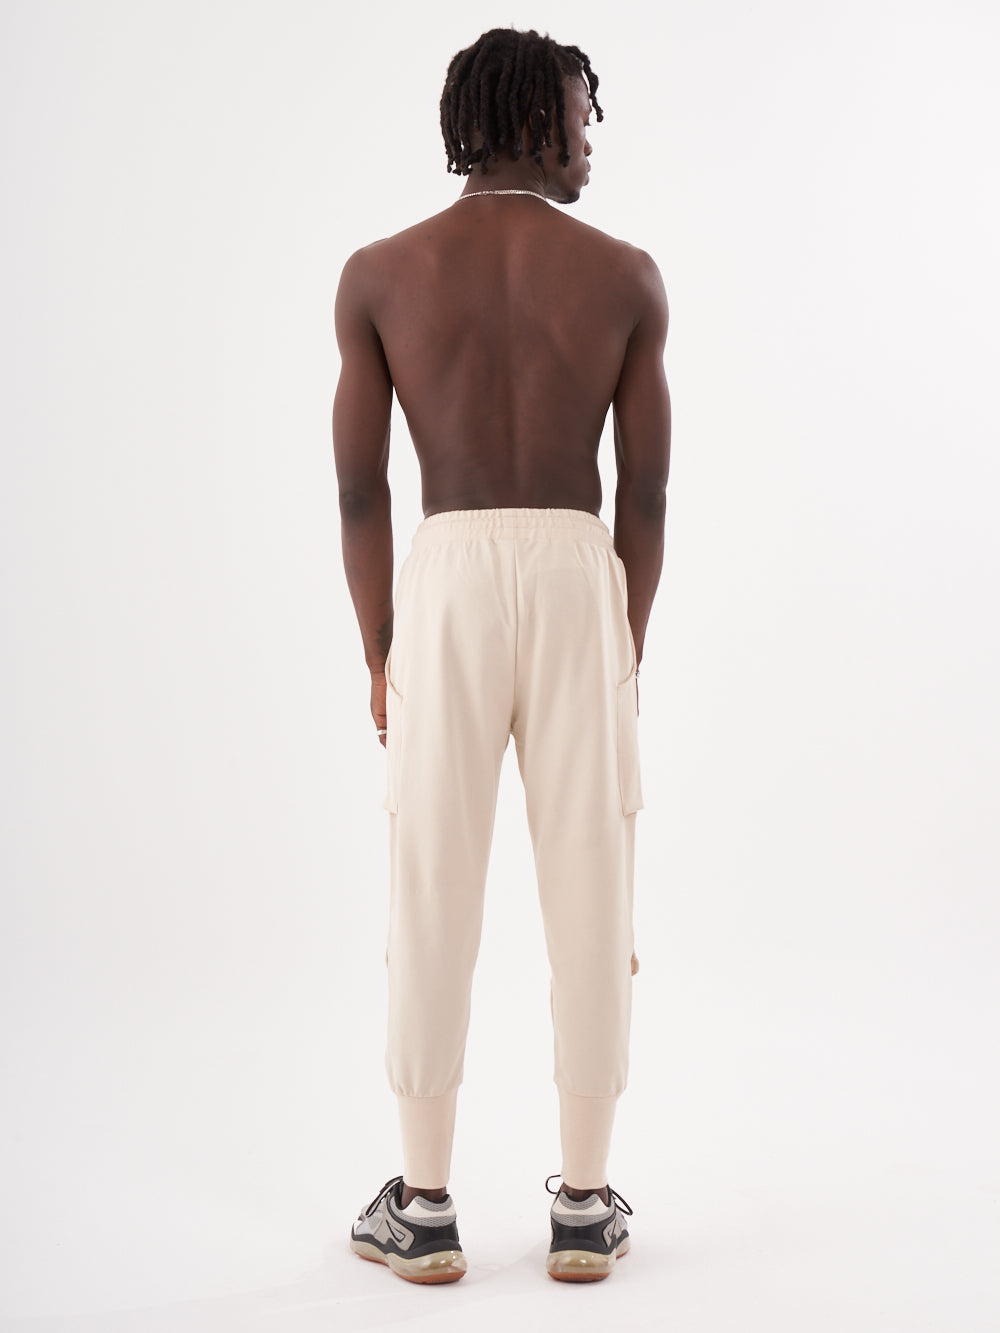 The back view of a man wearing GUERRILLA | BEIGE cargo pants.